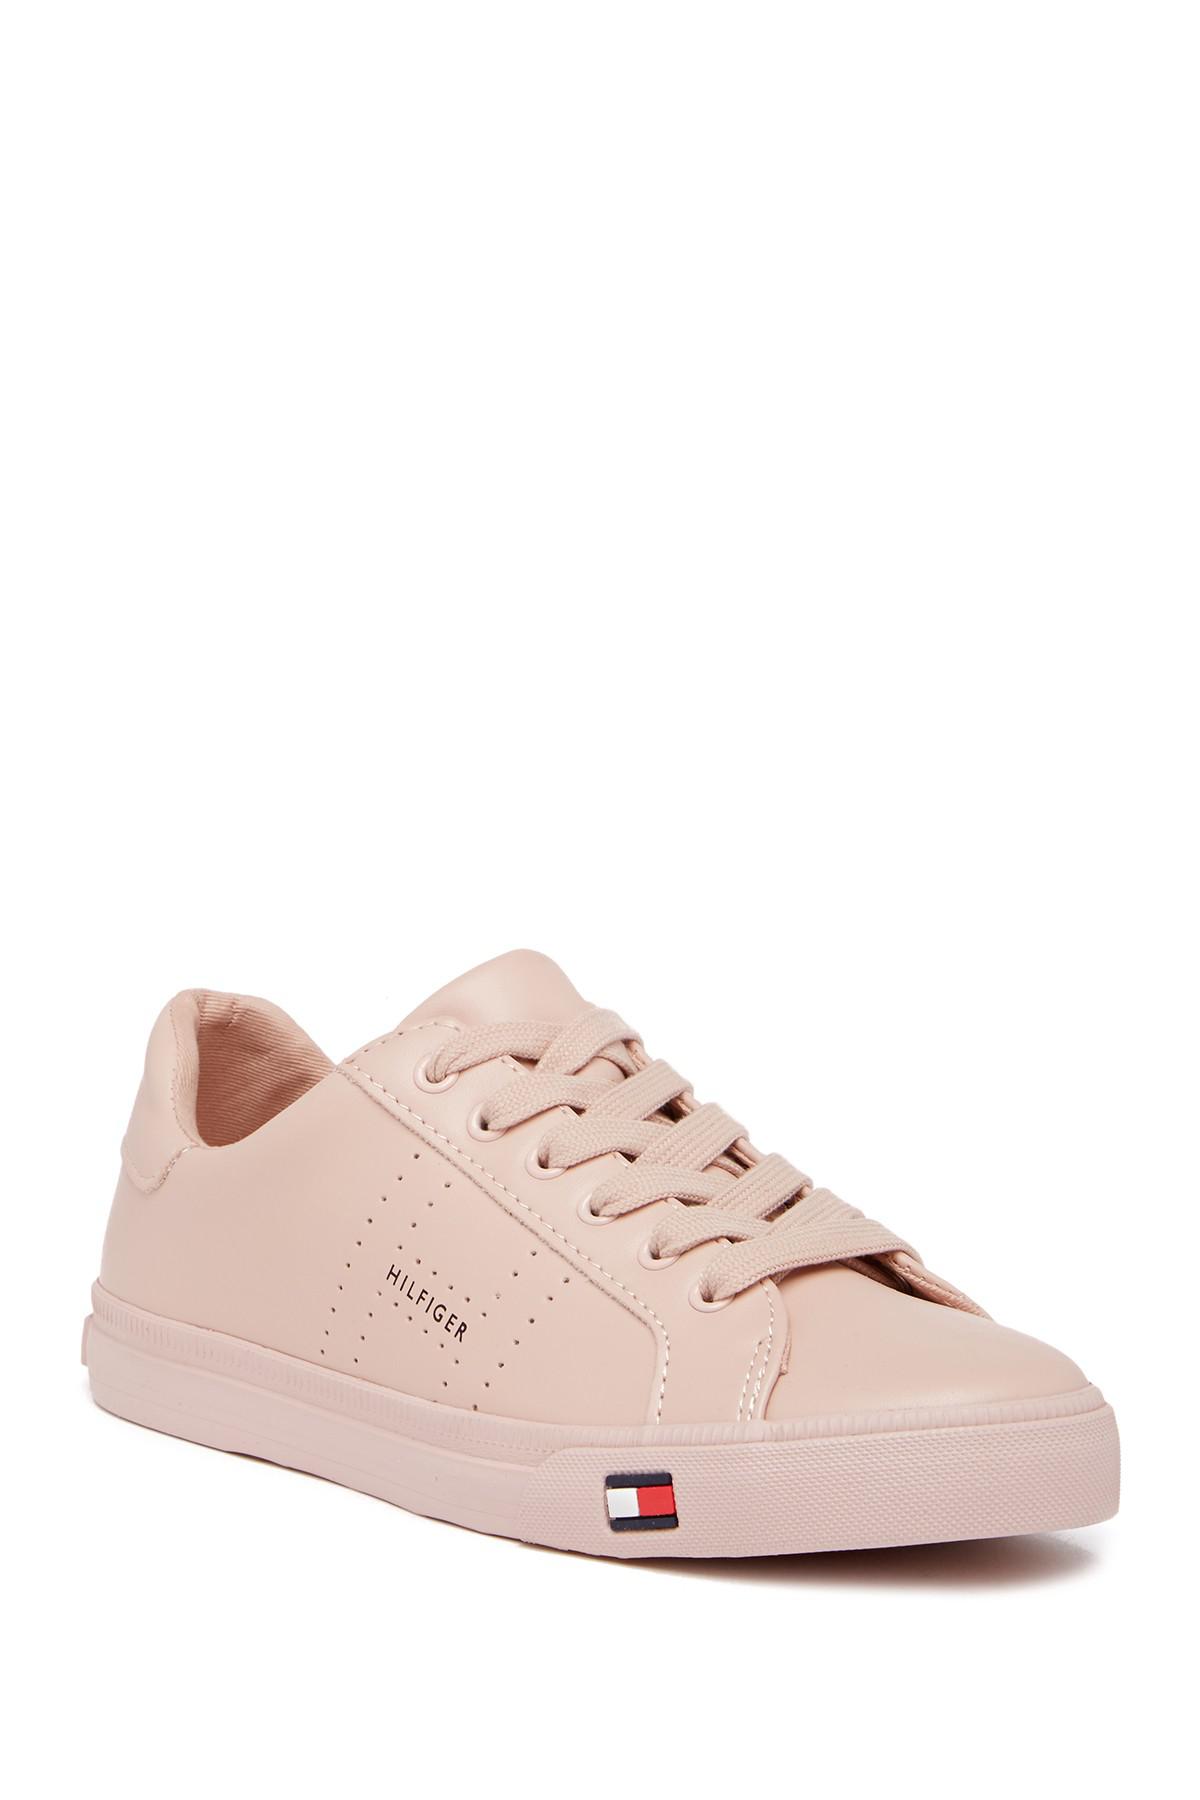 Tommy Hilfiger Leather Luster Sneaker 